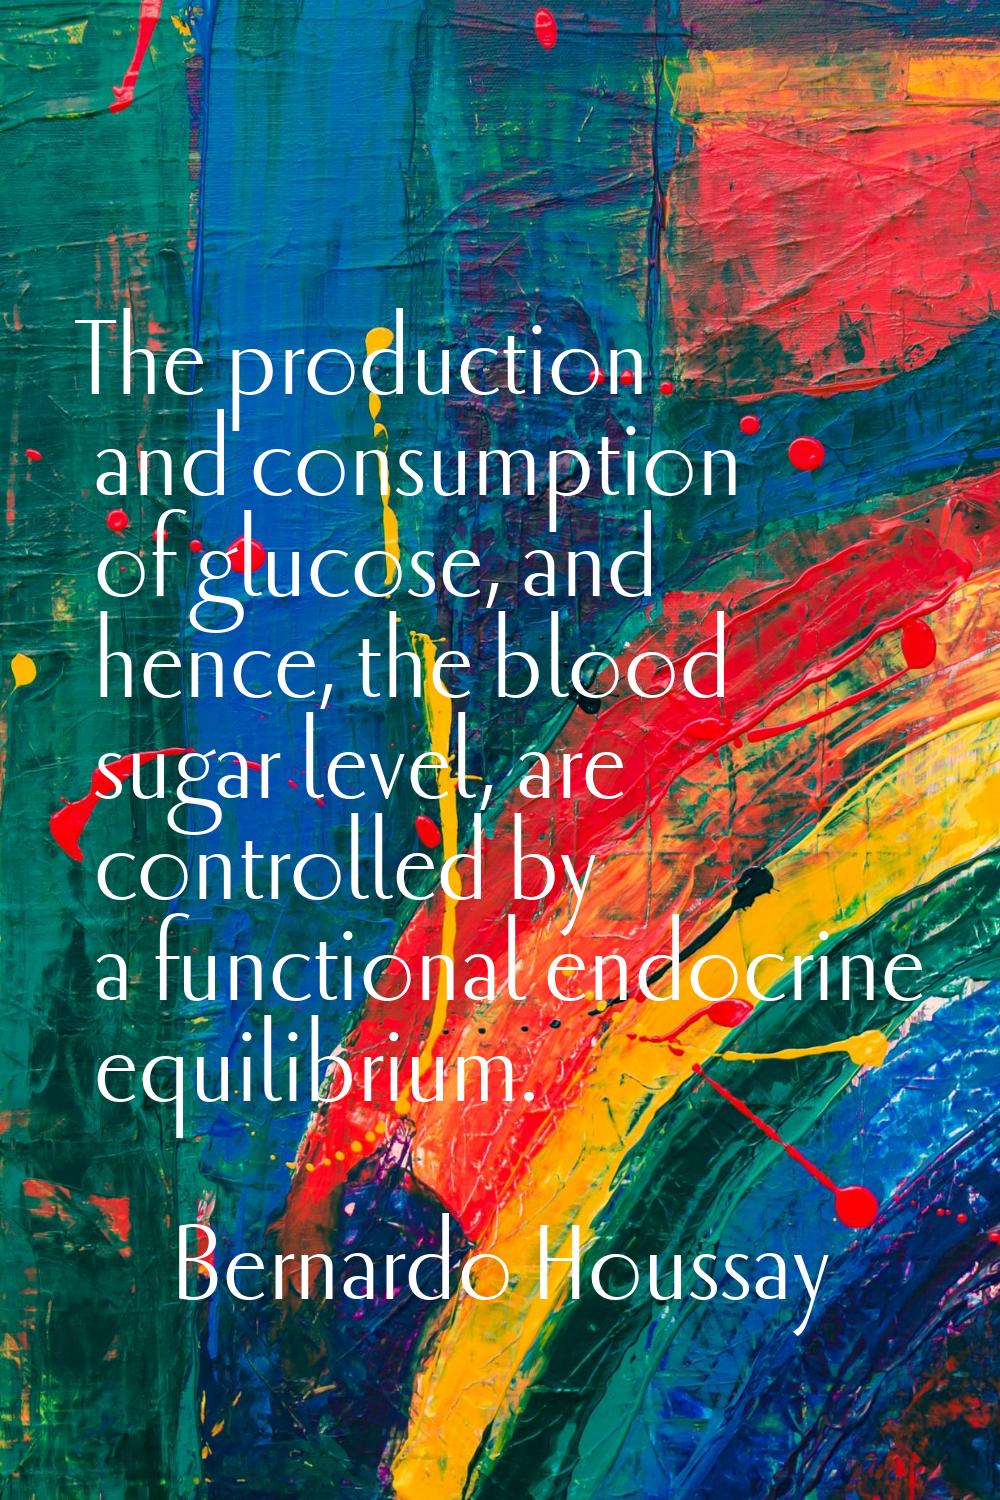 The production and consumption of glucose, and hence, the blood sugar level, are controlled by a fu